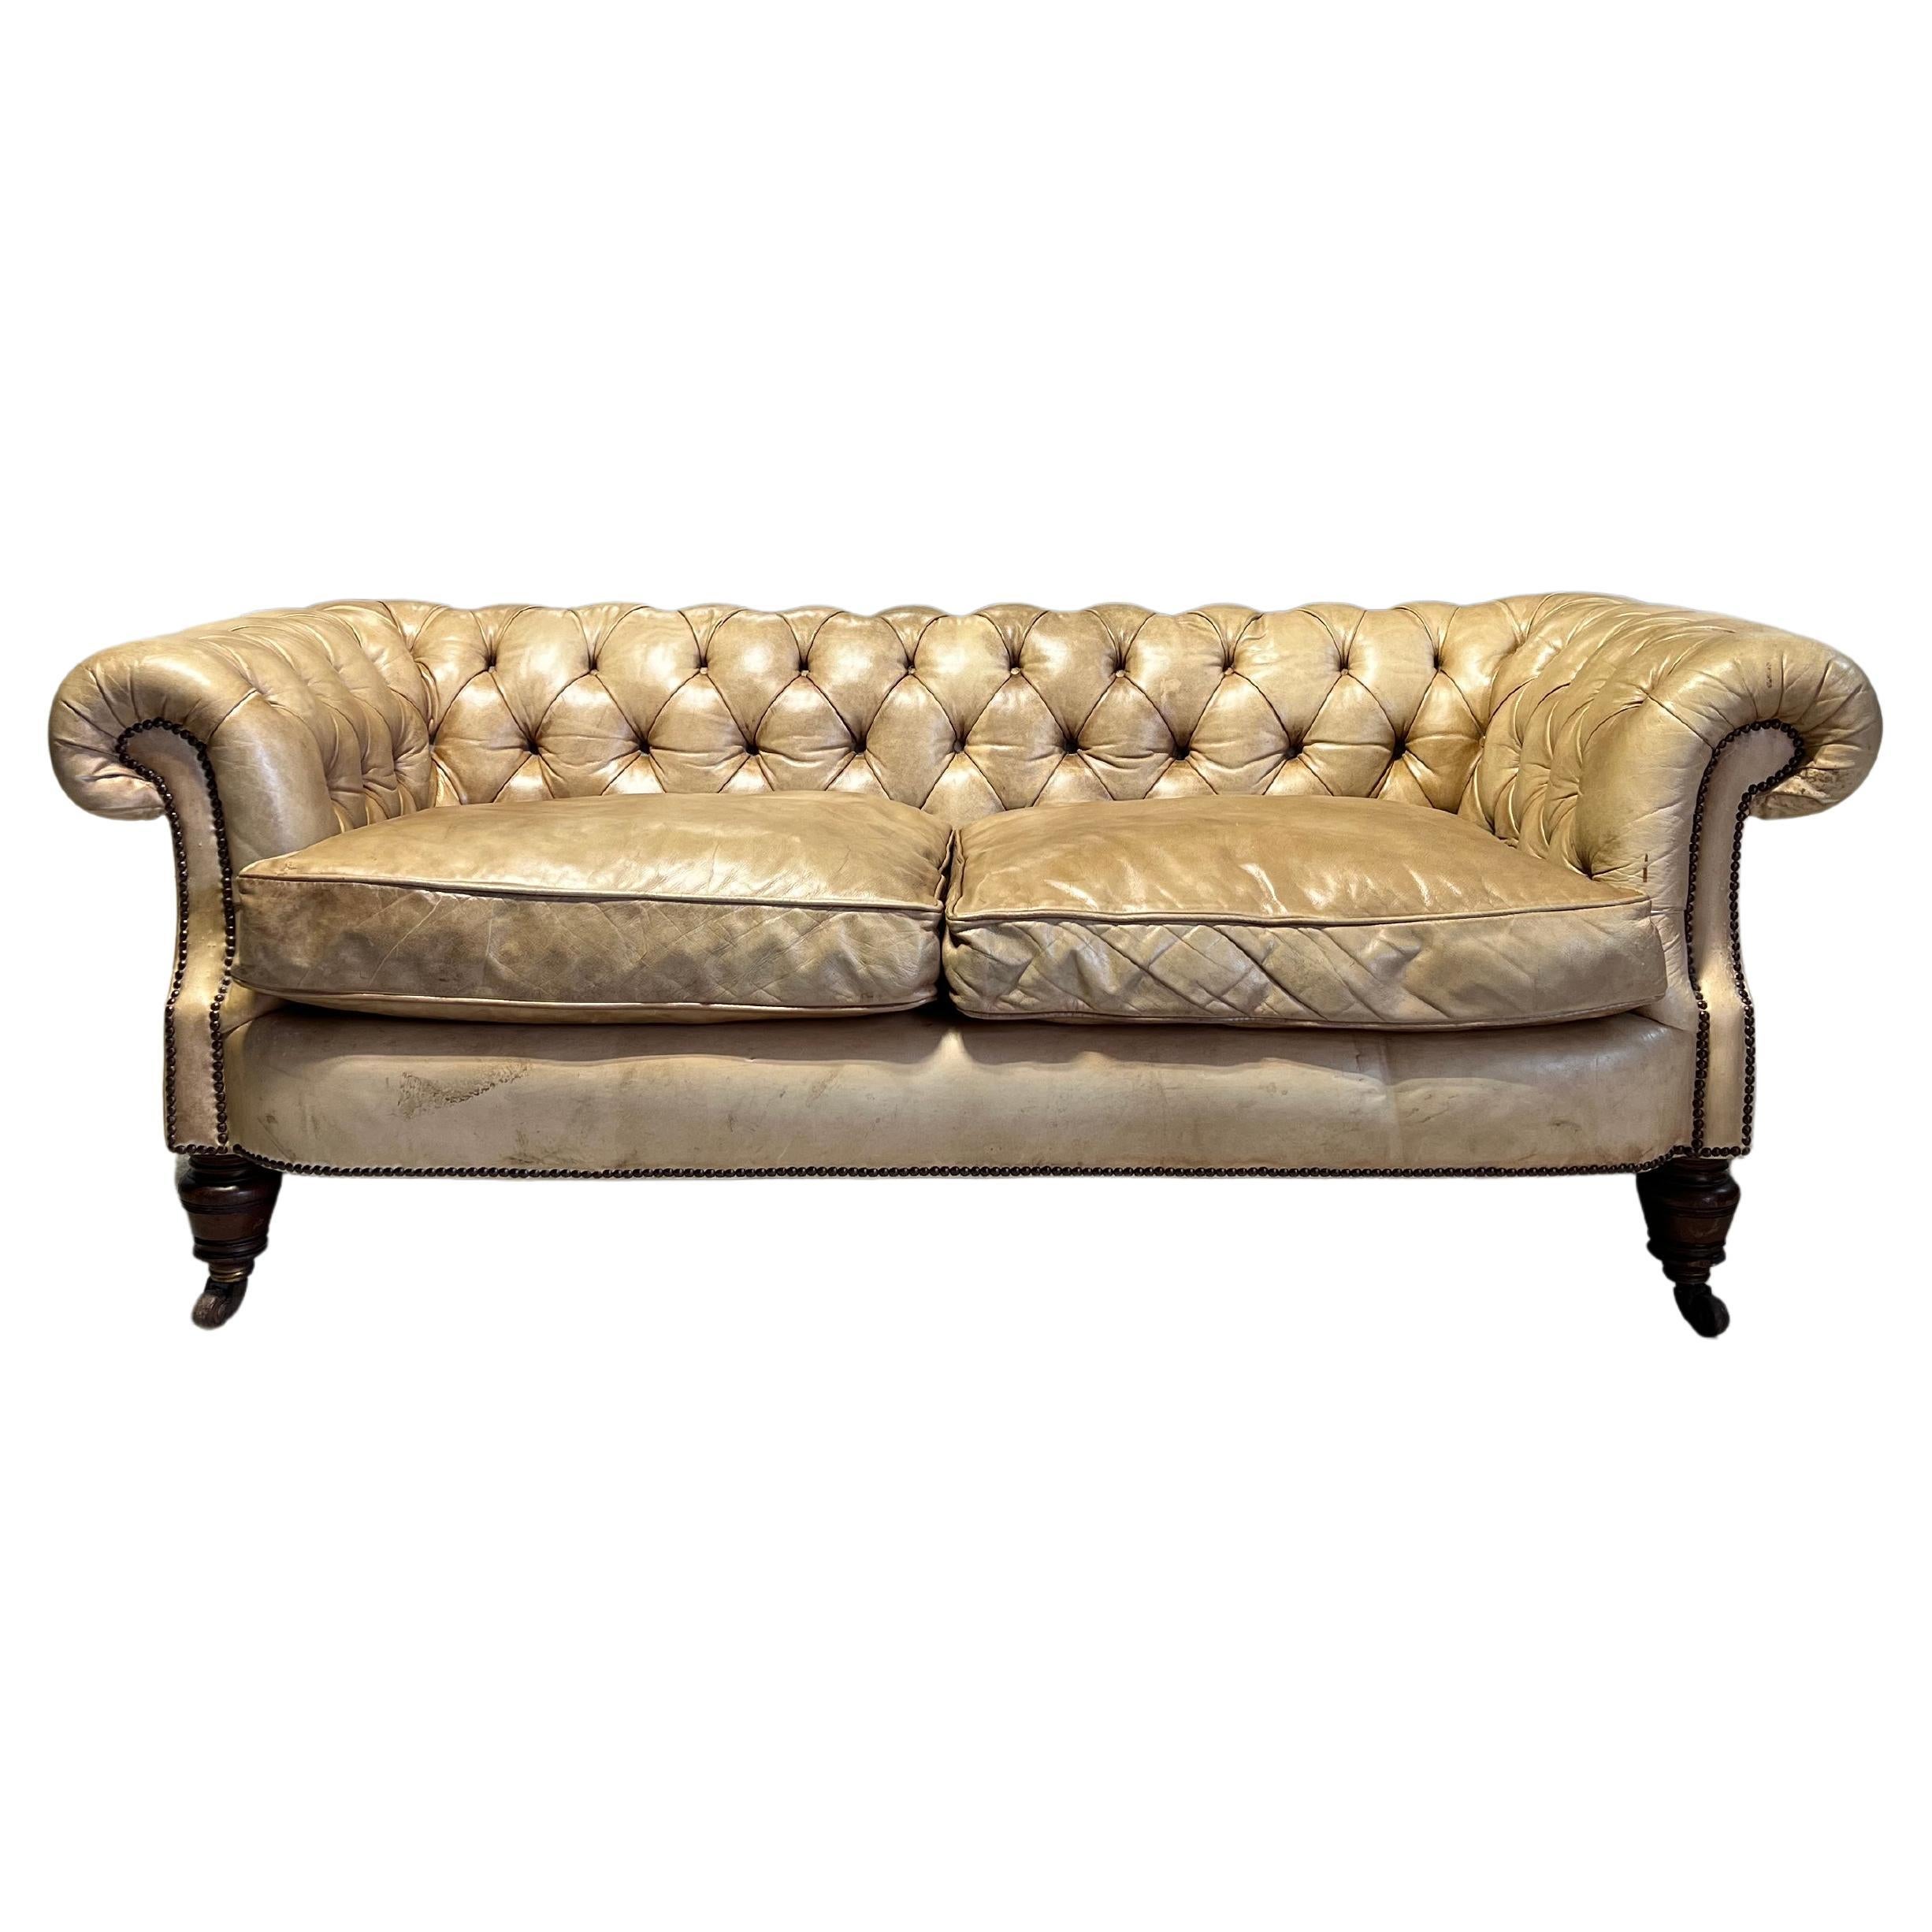 Antique Bow Fronted 19thC Chesterfield Sofa in Hand Dyed Parchment Leather For Sale